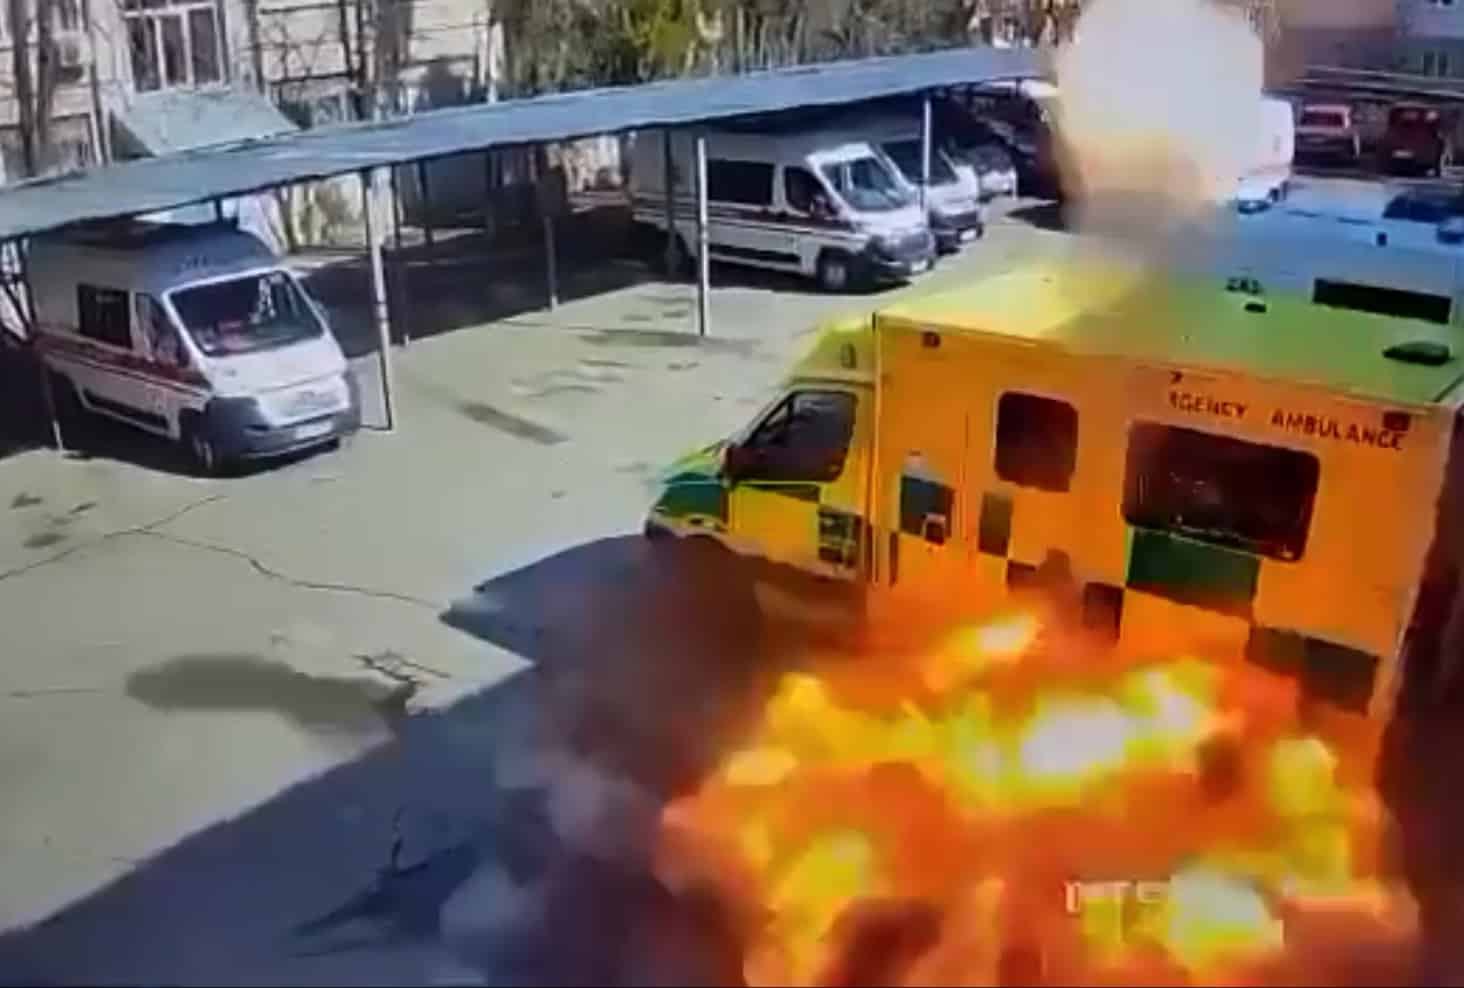 Ex-NHS ambulance sent to Ukraine blown up by Russian missile